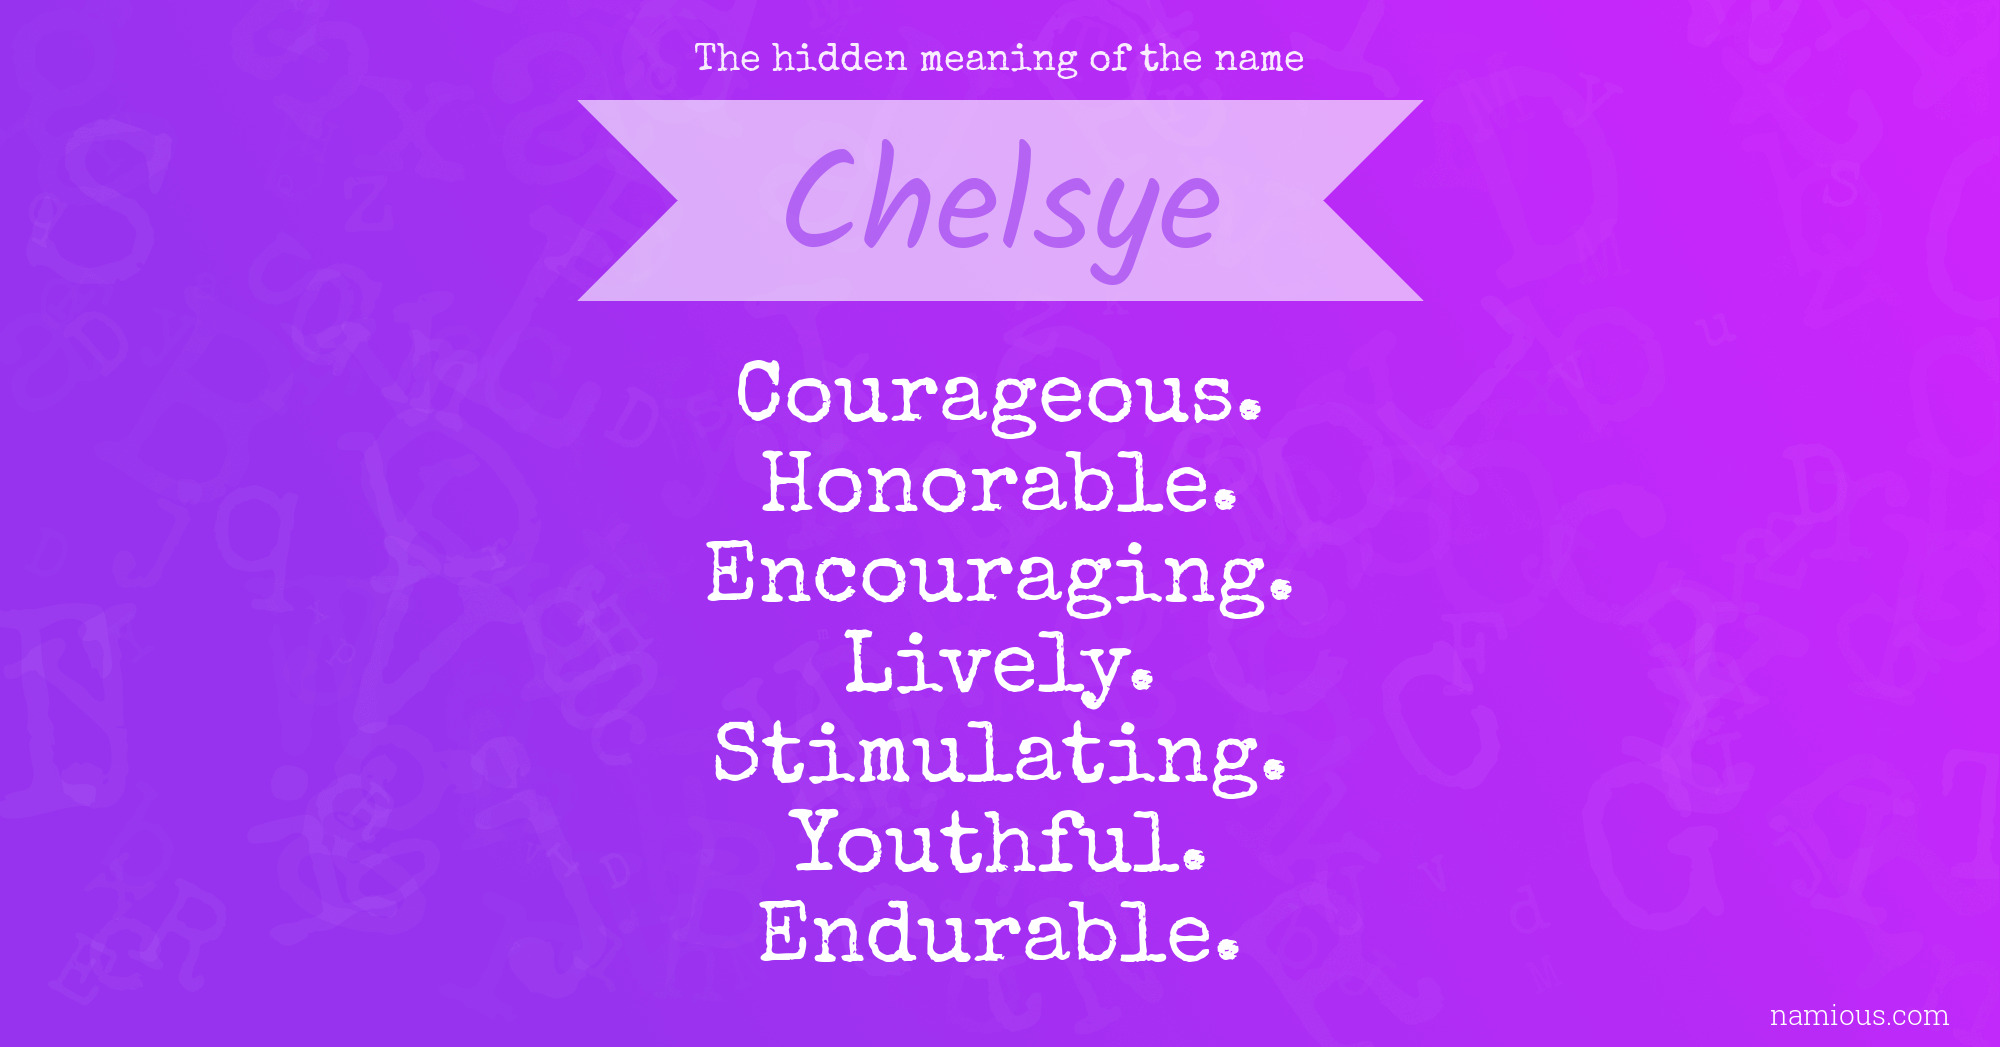 The hidden meaning of the name Chelsye